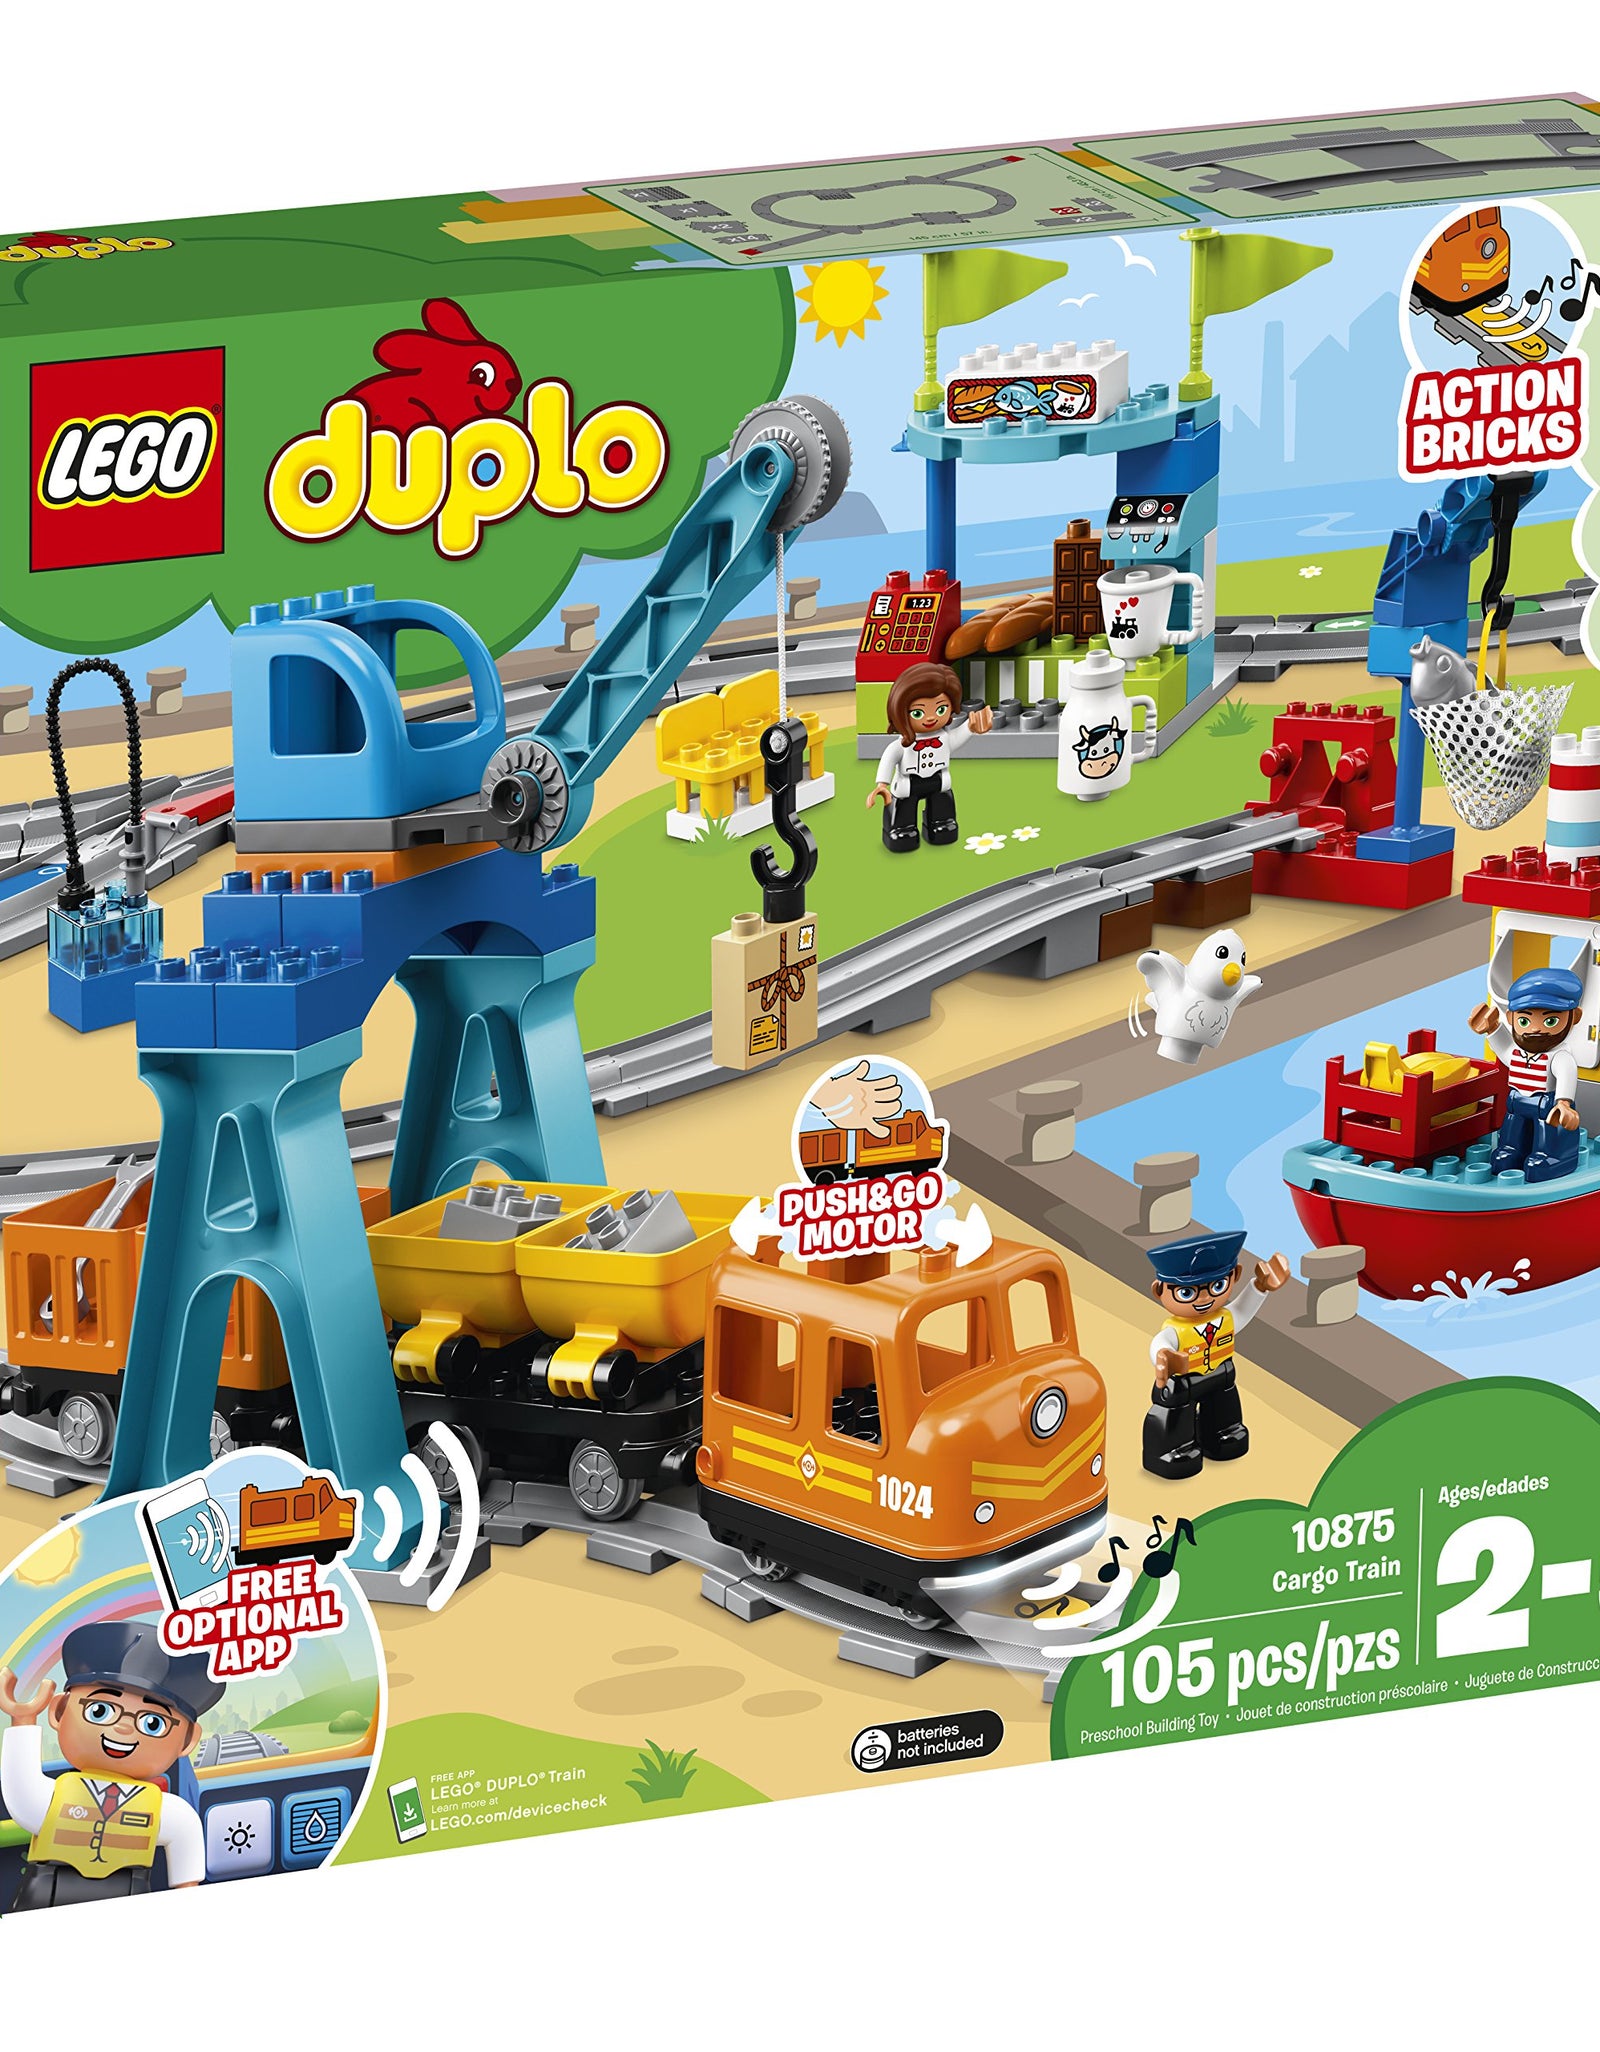 LEGO DUPLO Cargo Train 10875 Exclusive Battery-Operated Building Blocks Set, Best Engineering and STEM Toy for Toddlers (105 Pieces)